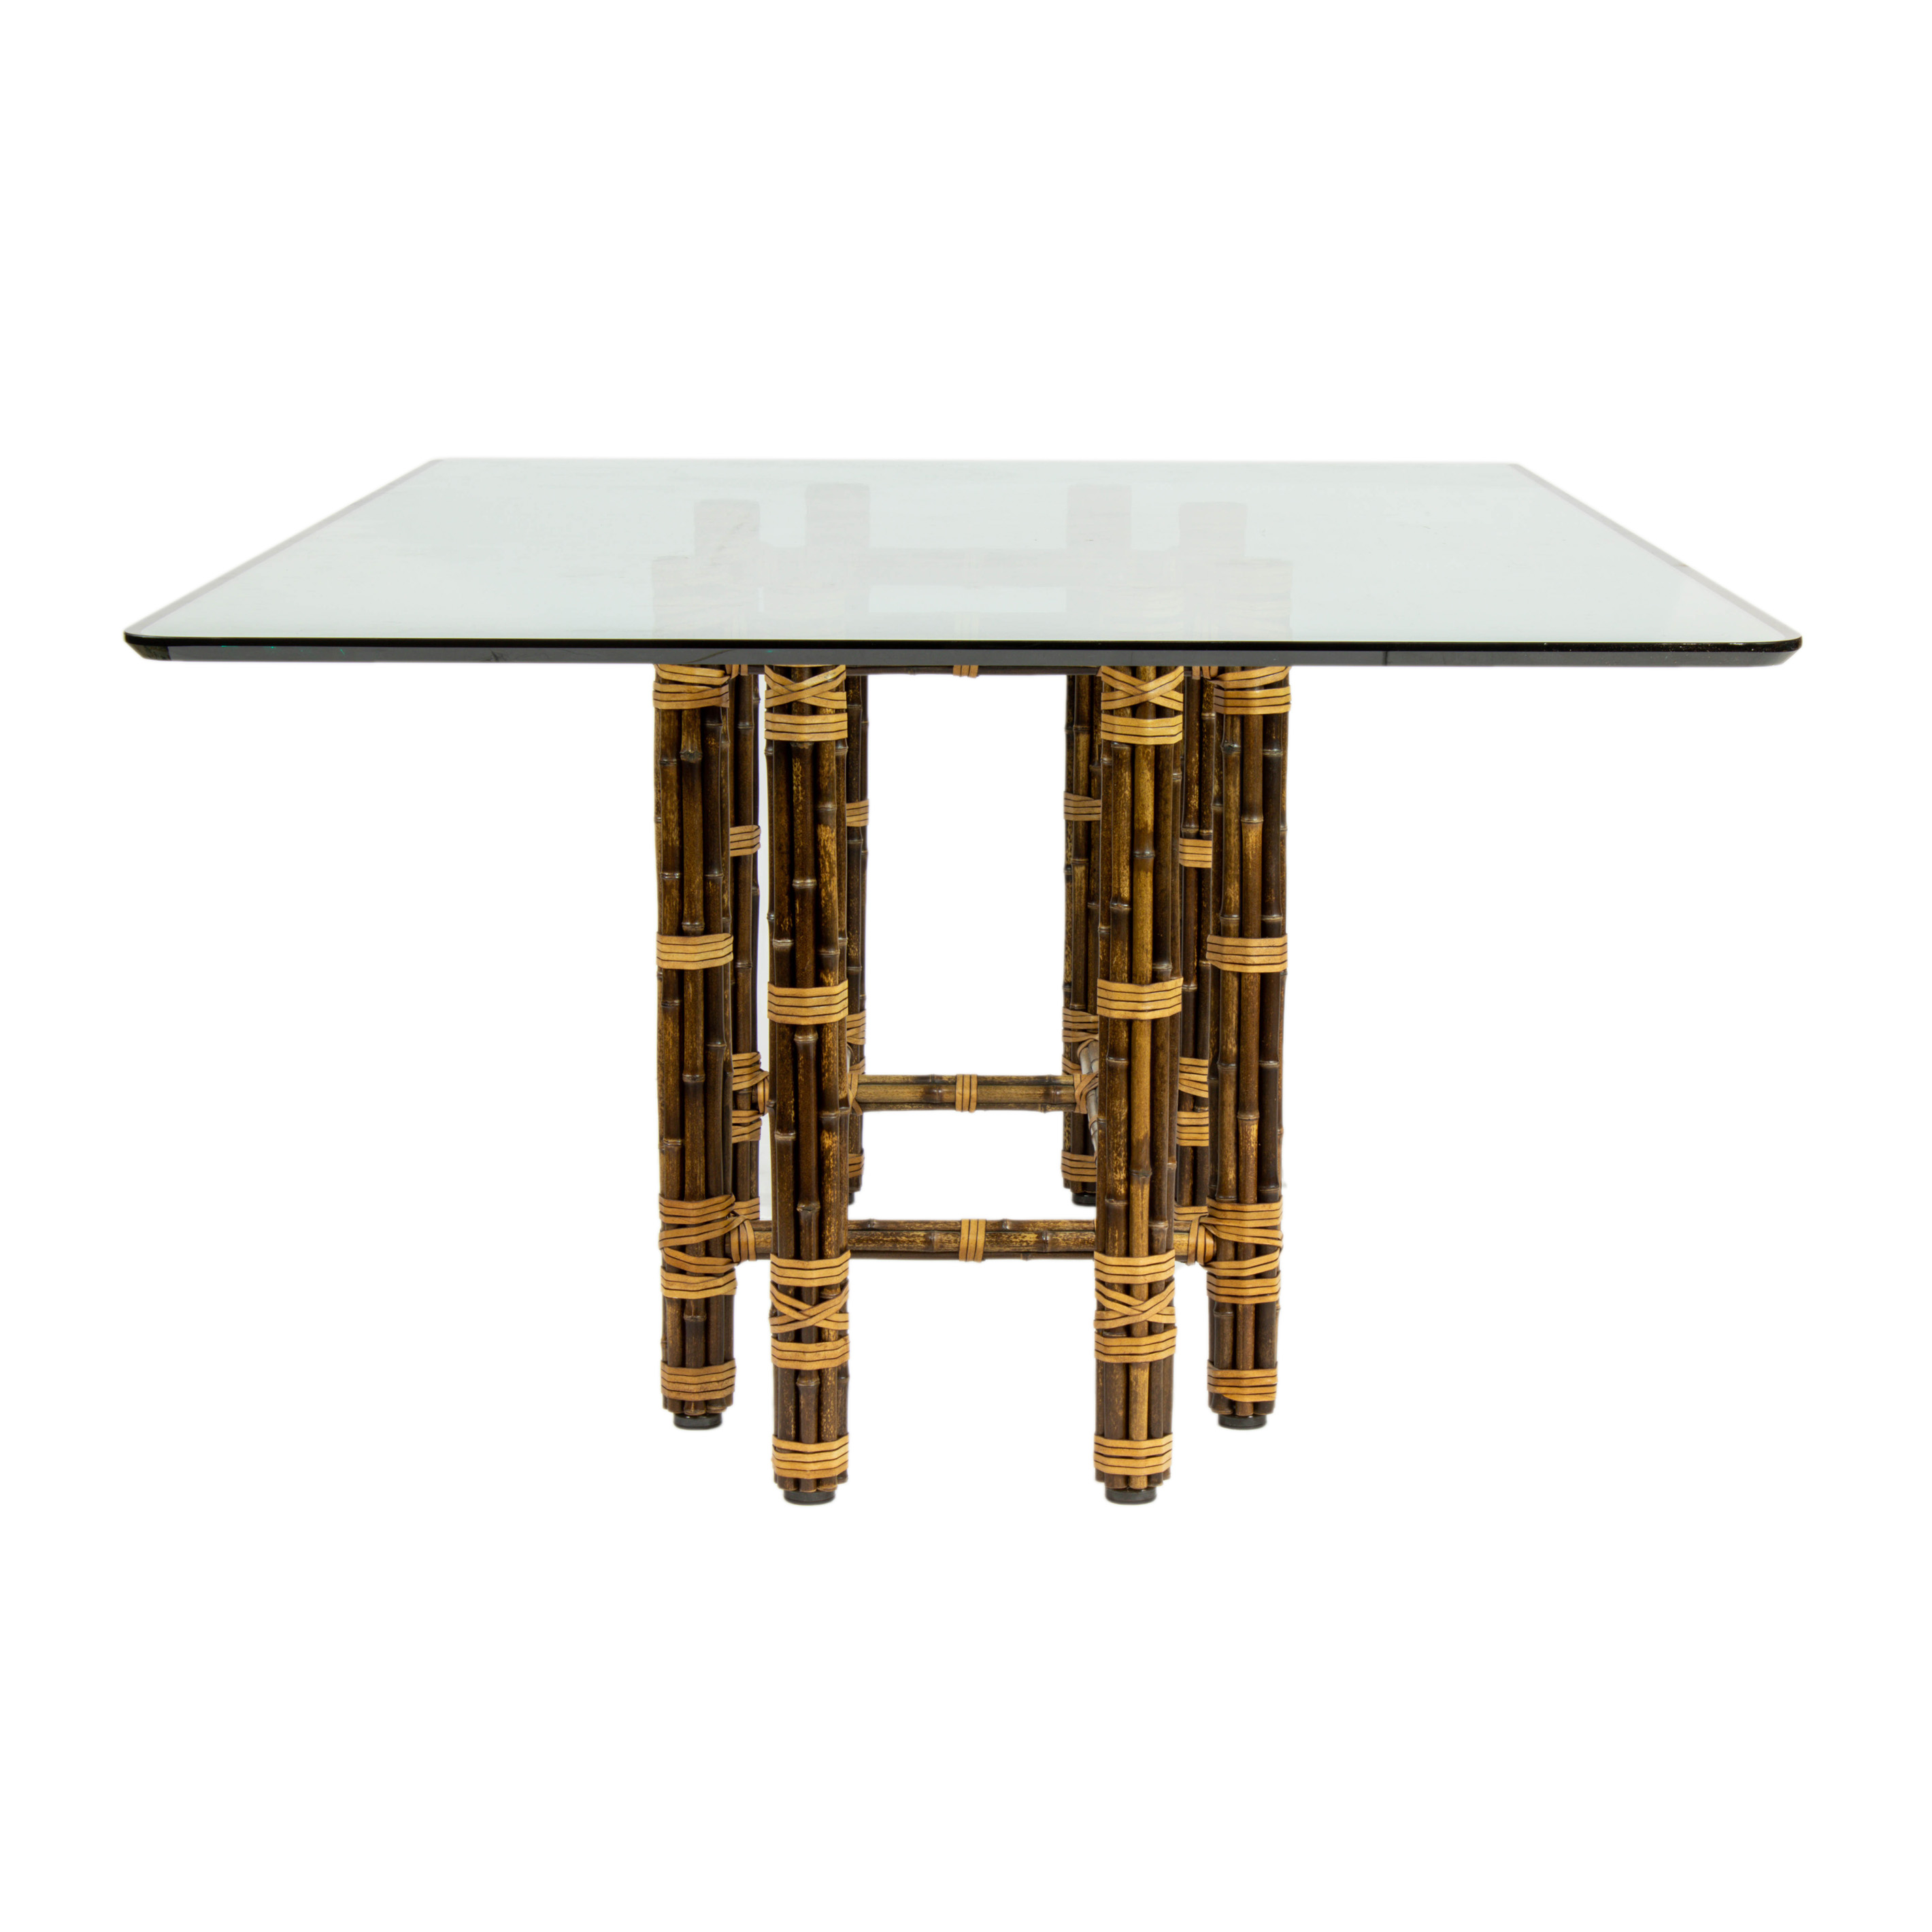 MCGUIRE SAN FRANCISCO DINING TABLE